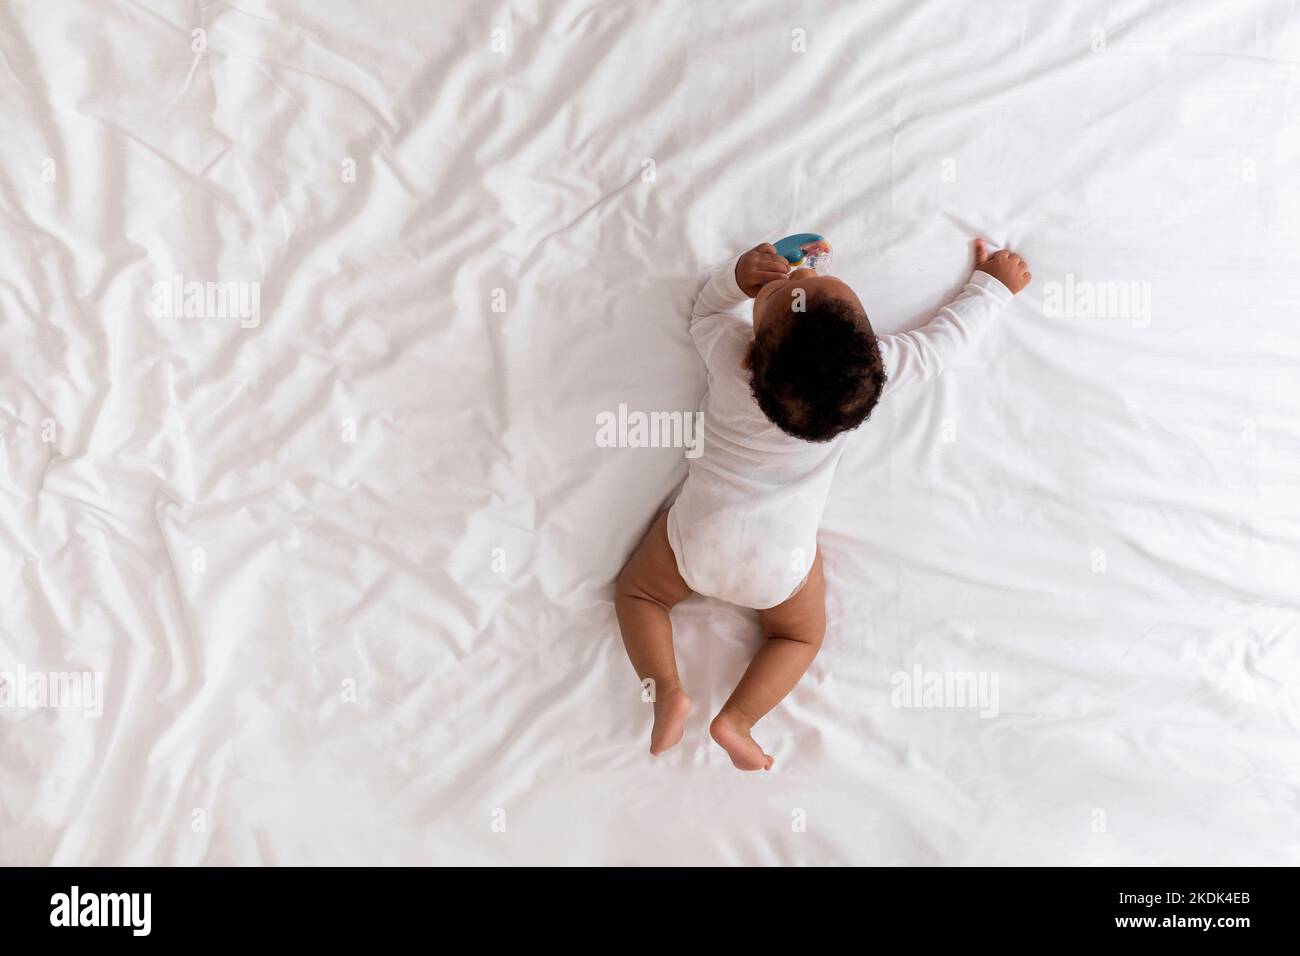 Little Black Baby Crawling On Bed And Playing With His Rattle Toy Stock Photo